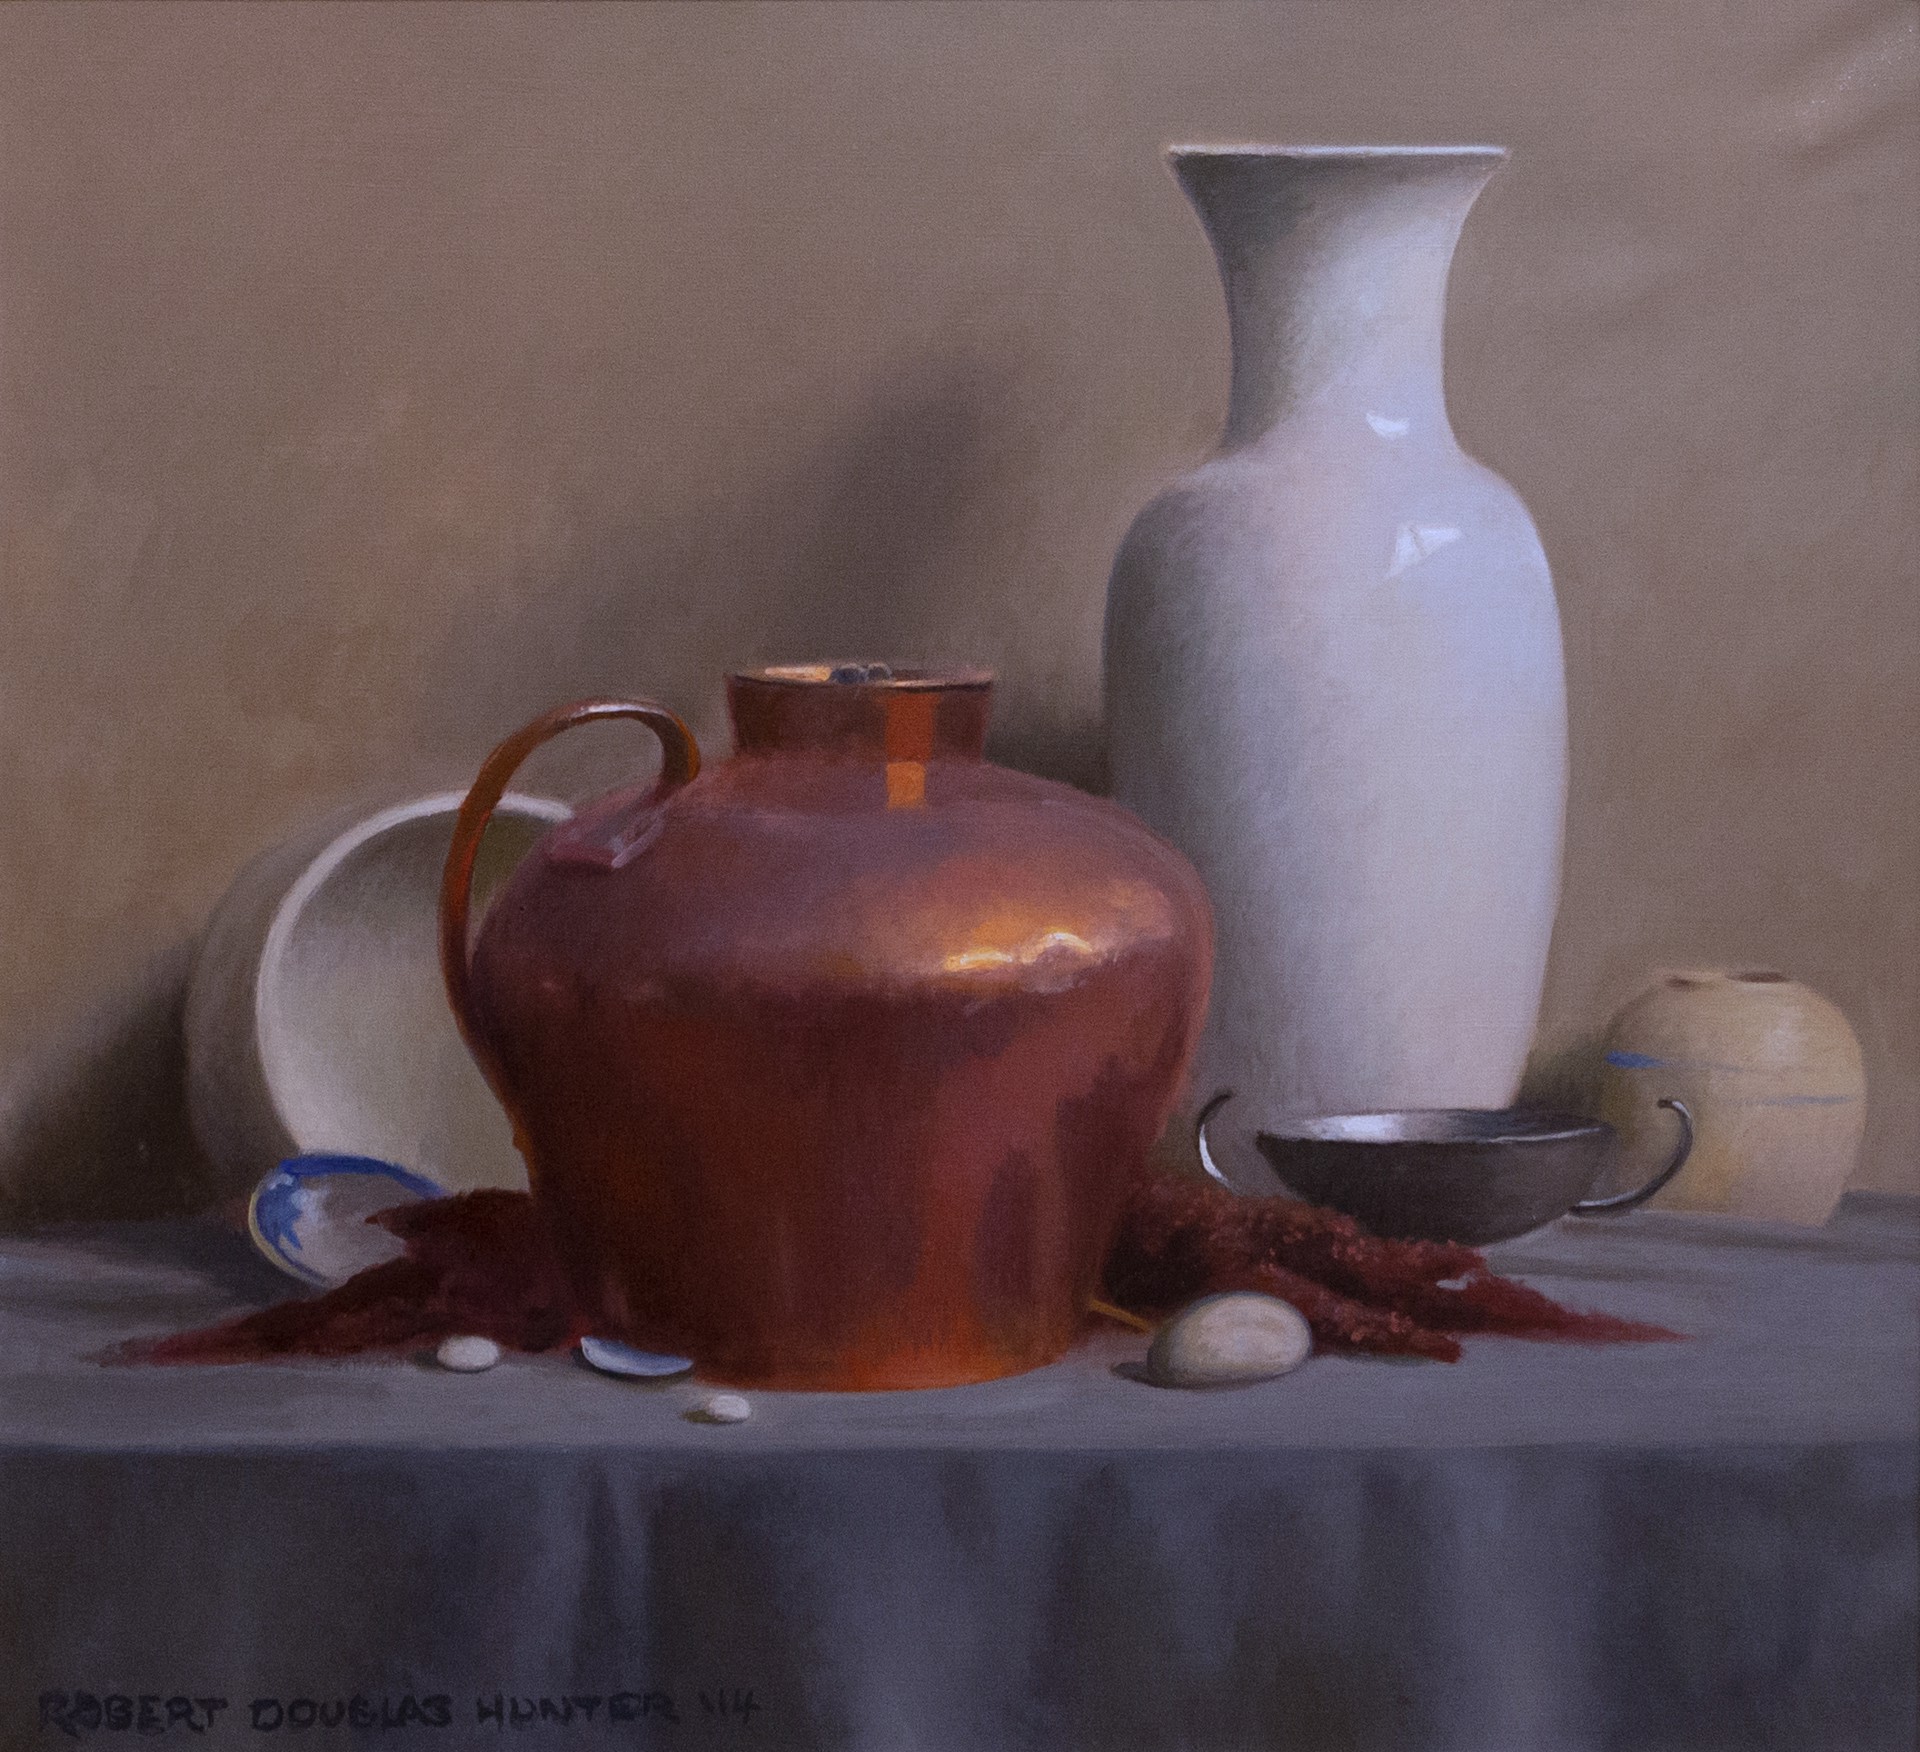 Still Life with a Covered Copper Bowl by Robert Douglas Hunter